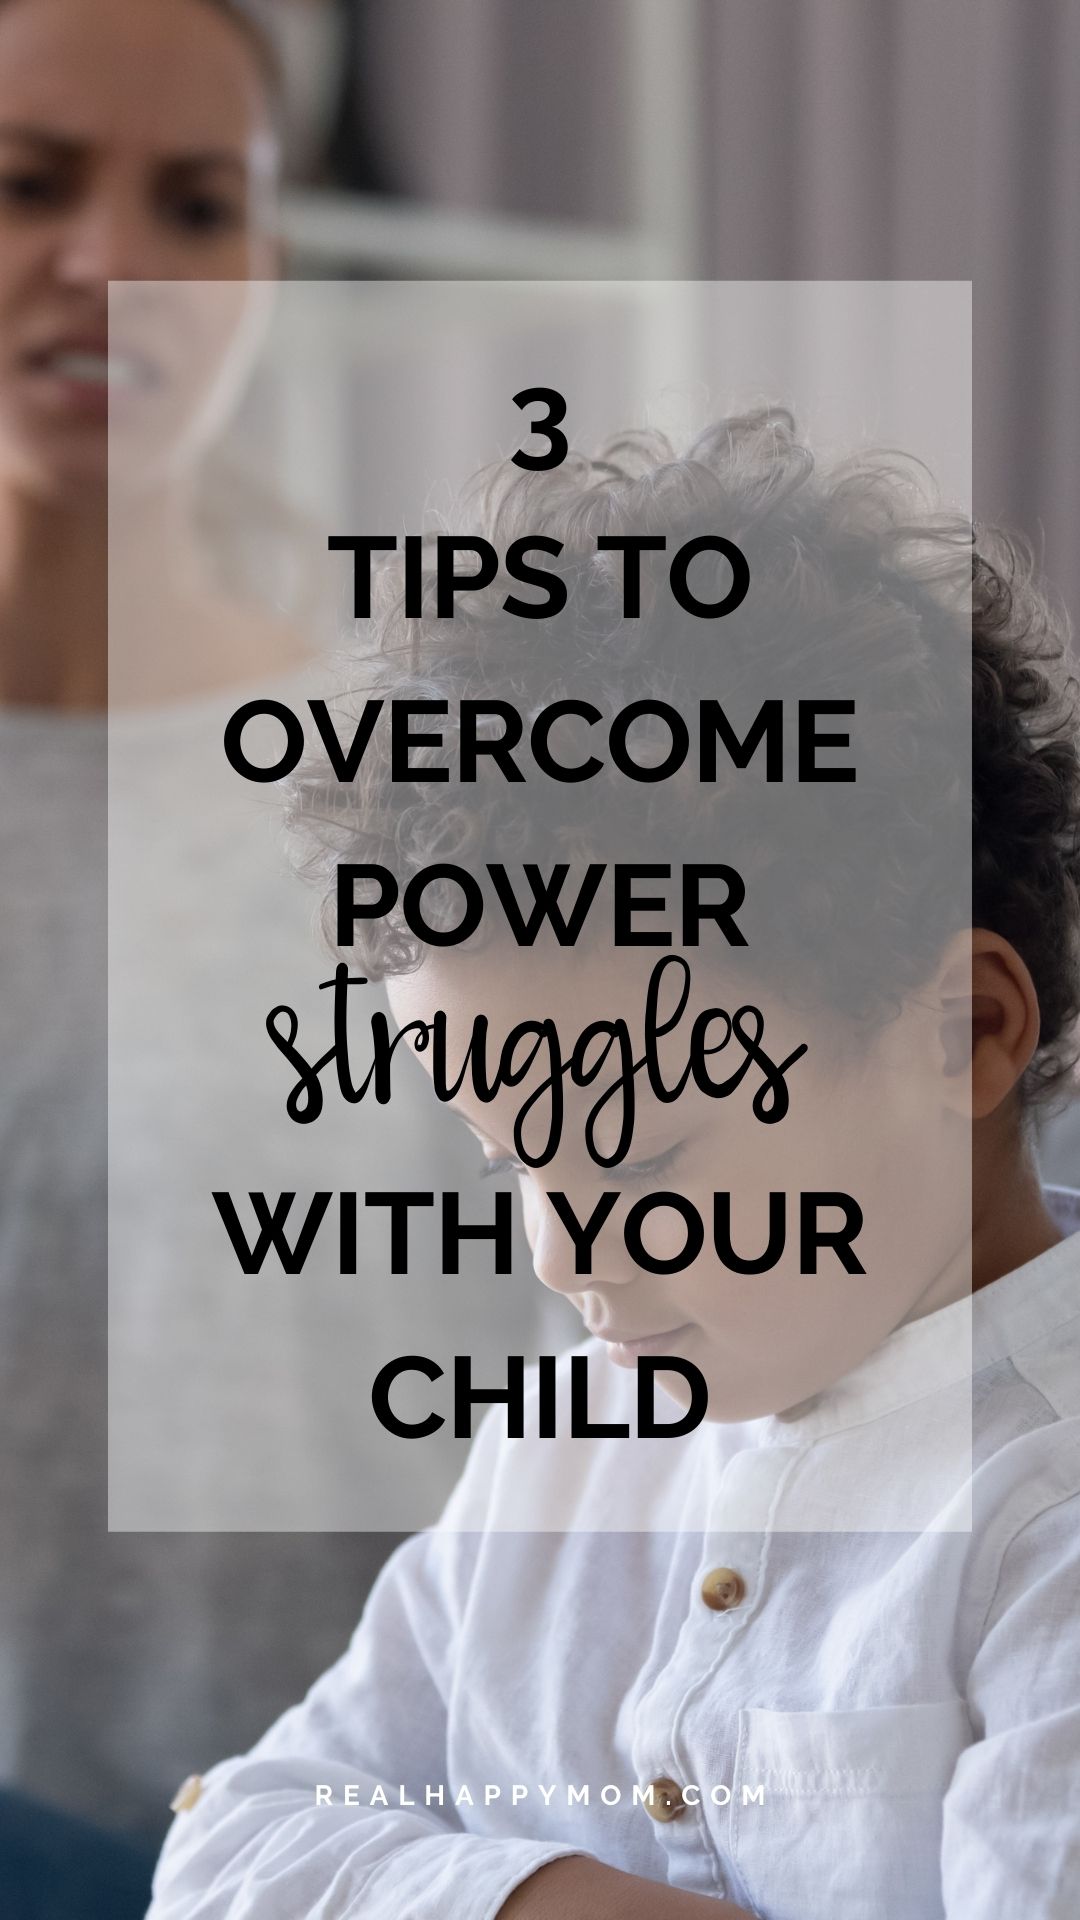 3 Tips to Overcome Power Struggles With Your Child